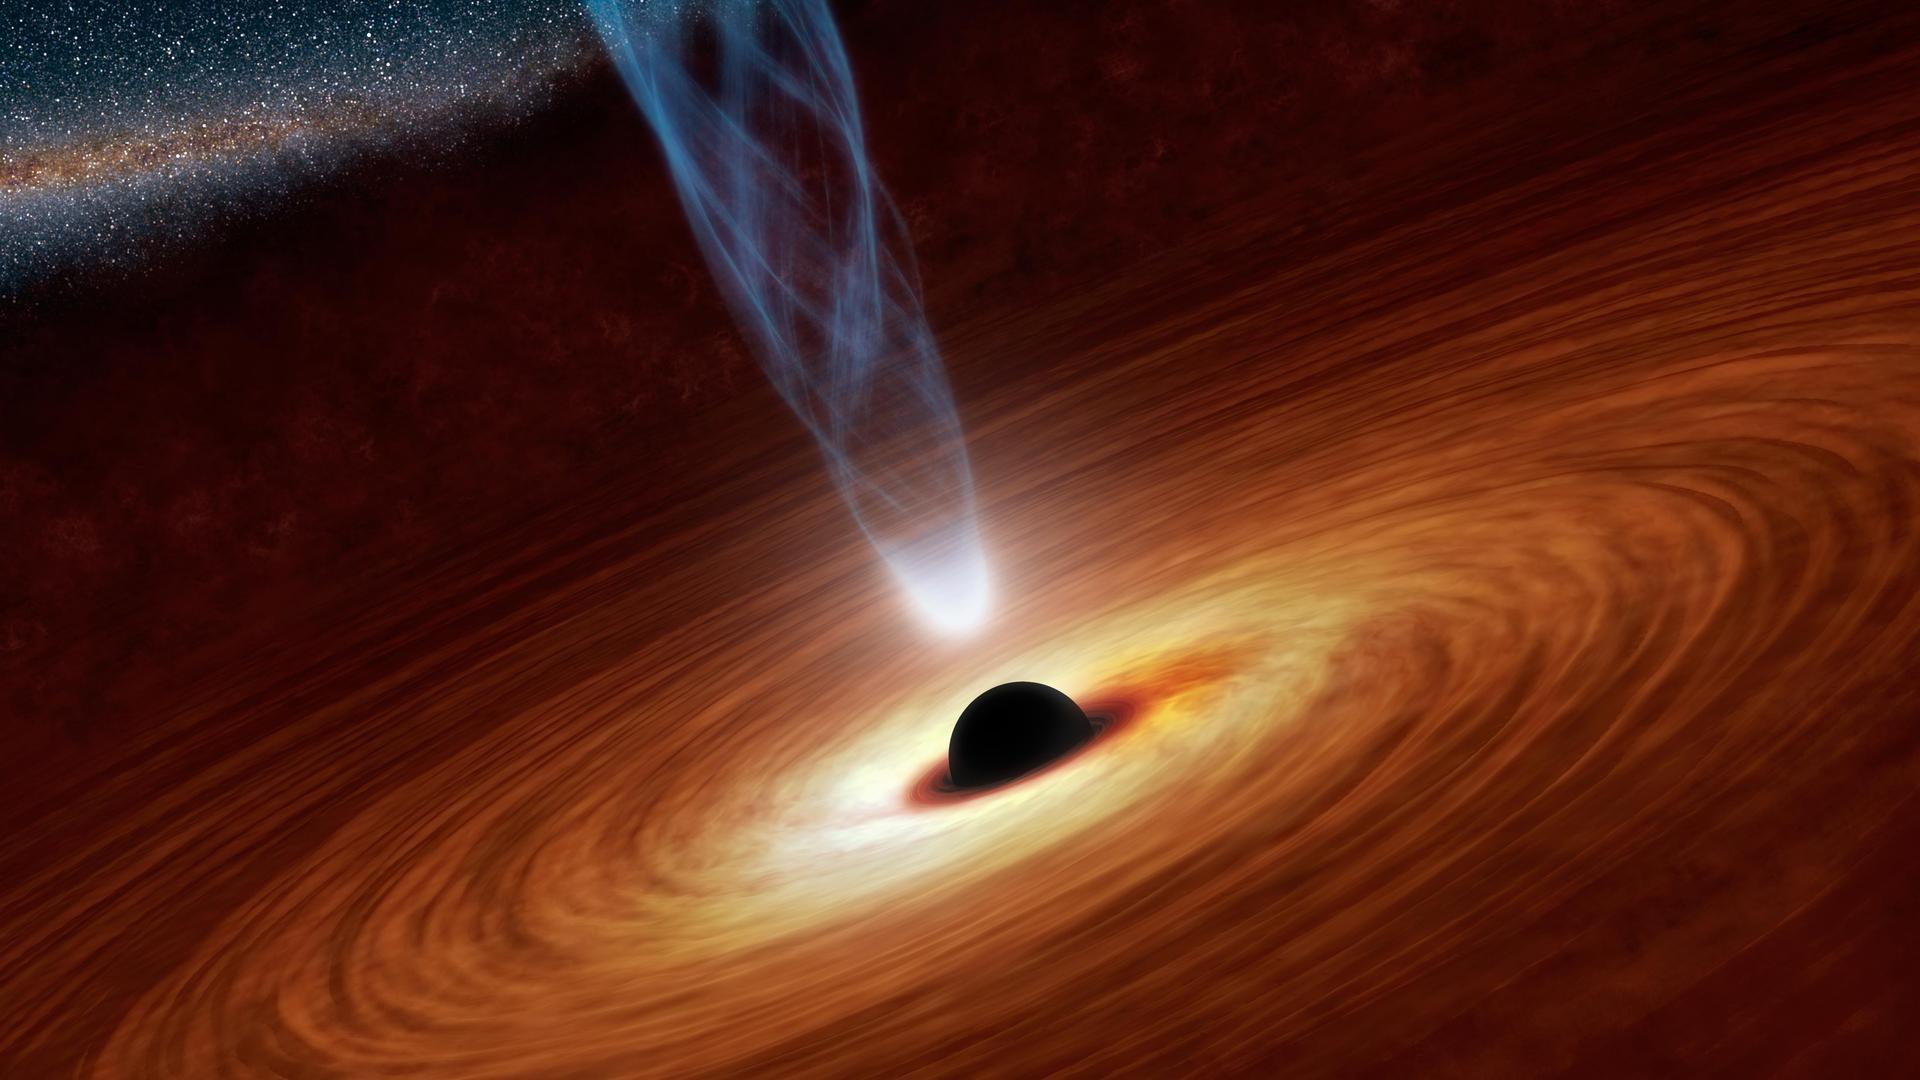 spherical black hole surrounded by swirling disc of material